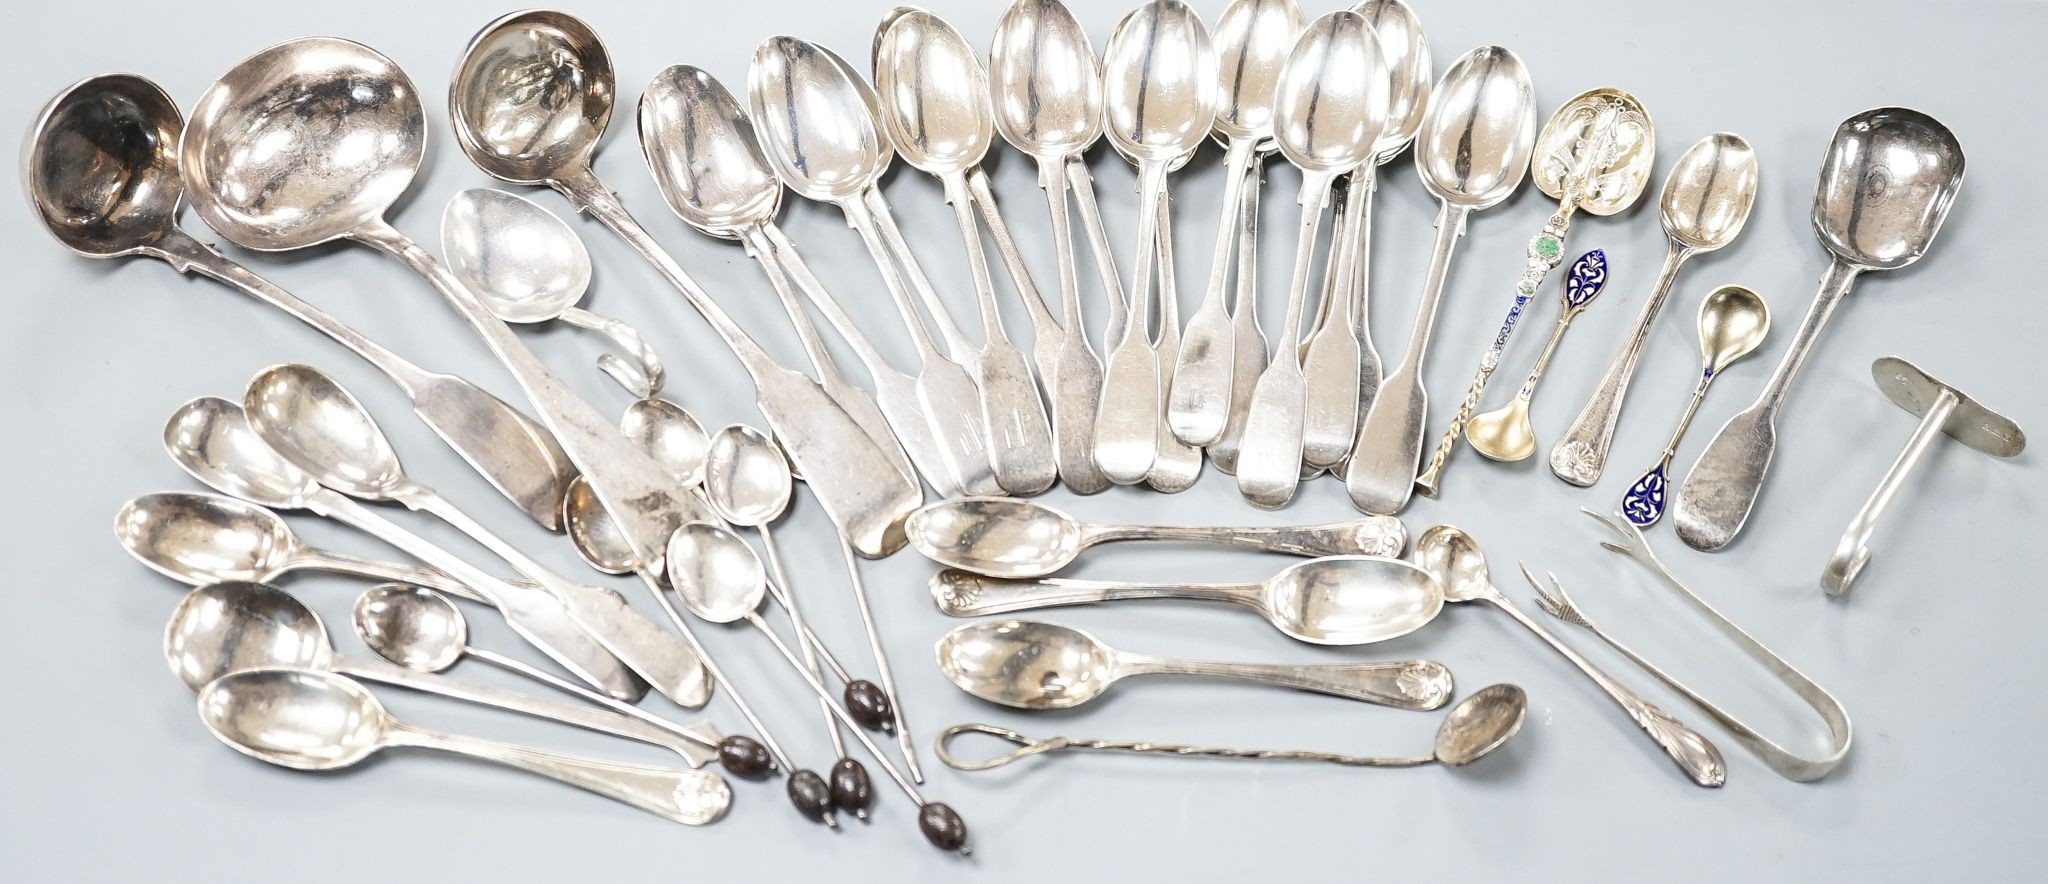 A set of twelve Victorian silver fiddle pattern teaspoons, London, 1870, a pair of Victorian sauce lades and a quantity of assorted sundry silver flatware